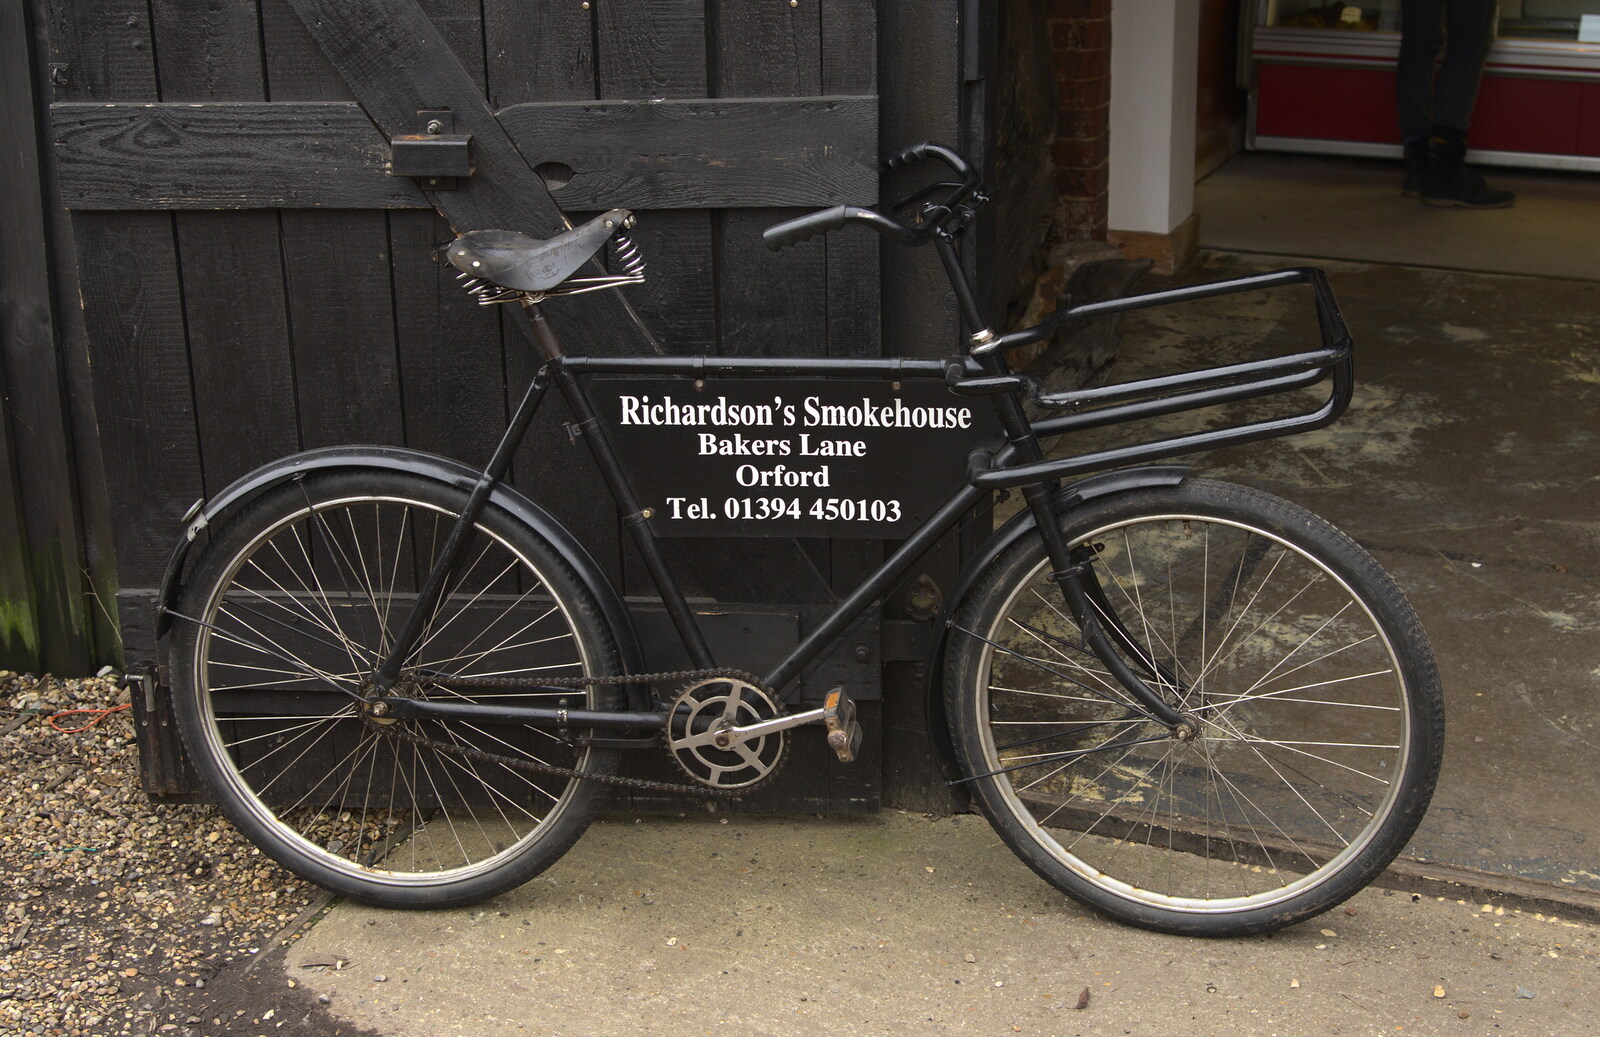 An old bike at Richardson's Smokehouse from A Trip to Orford Castle, Orford, Suffolk - 2nd March 2014